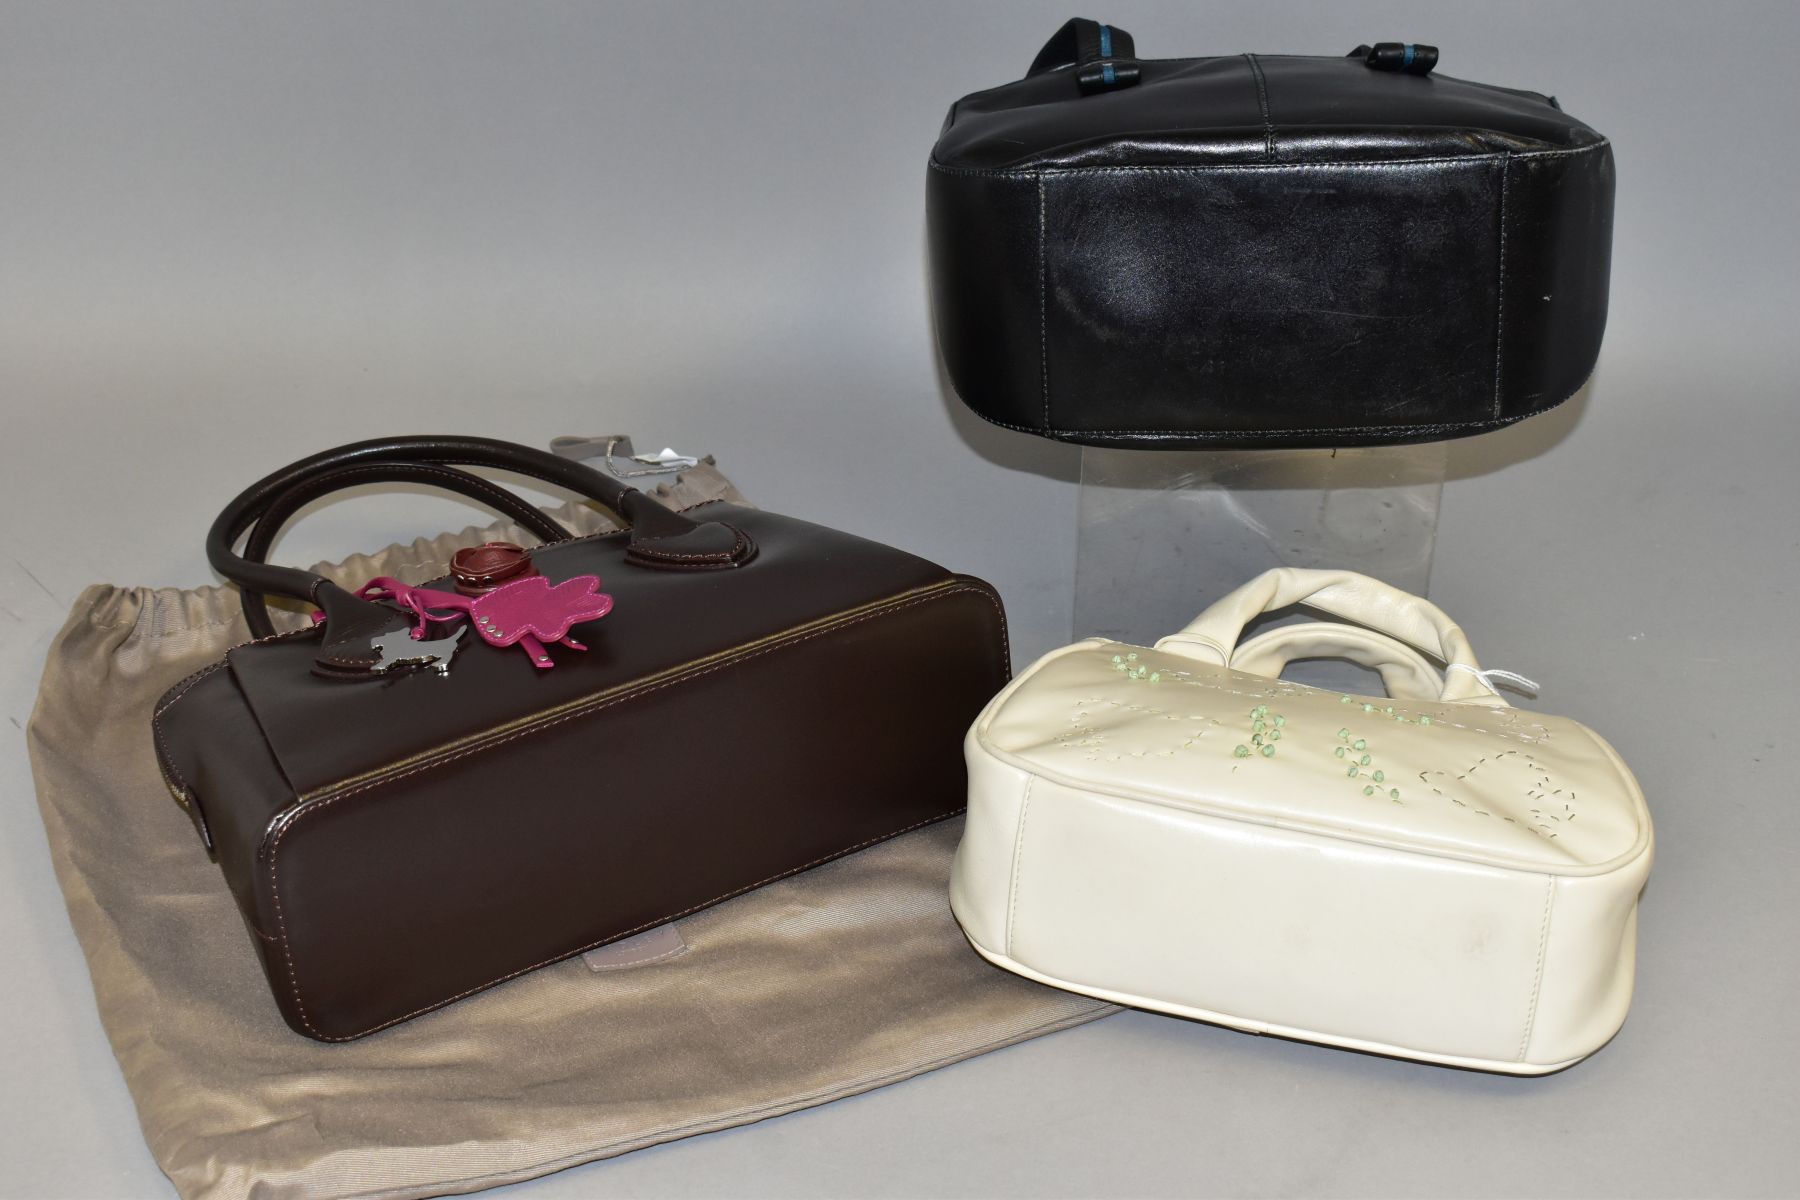 THREE RADLEY HANDBAGS, comprising a cream leather bag with stitched outlines of doves and olive - Image 3 of 3